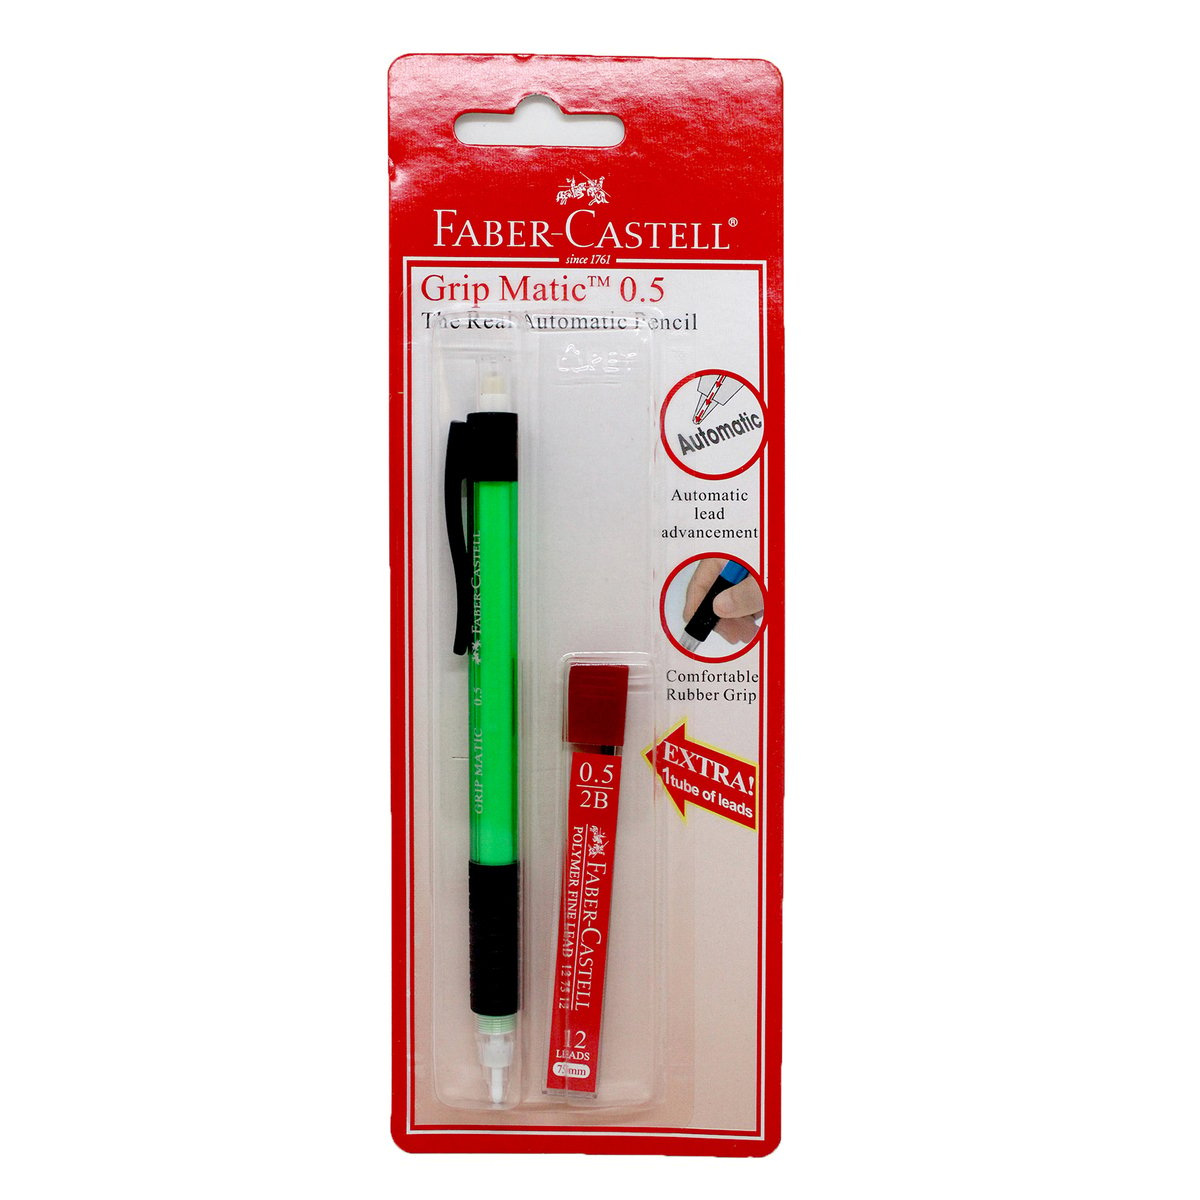 Faber-Castell Grip Matic+Lead 5mm 133800